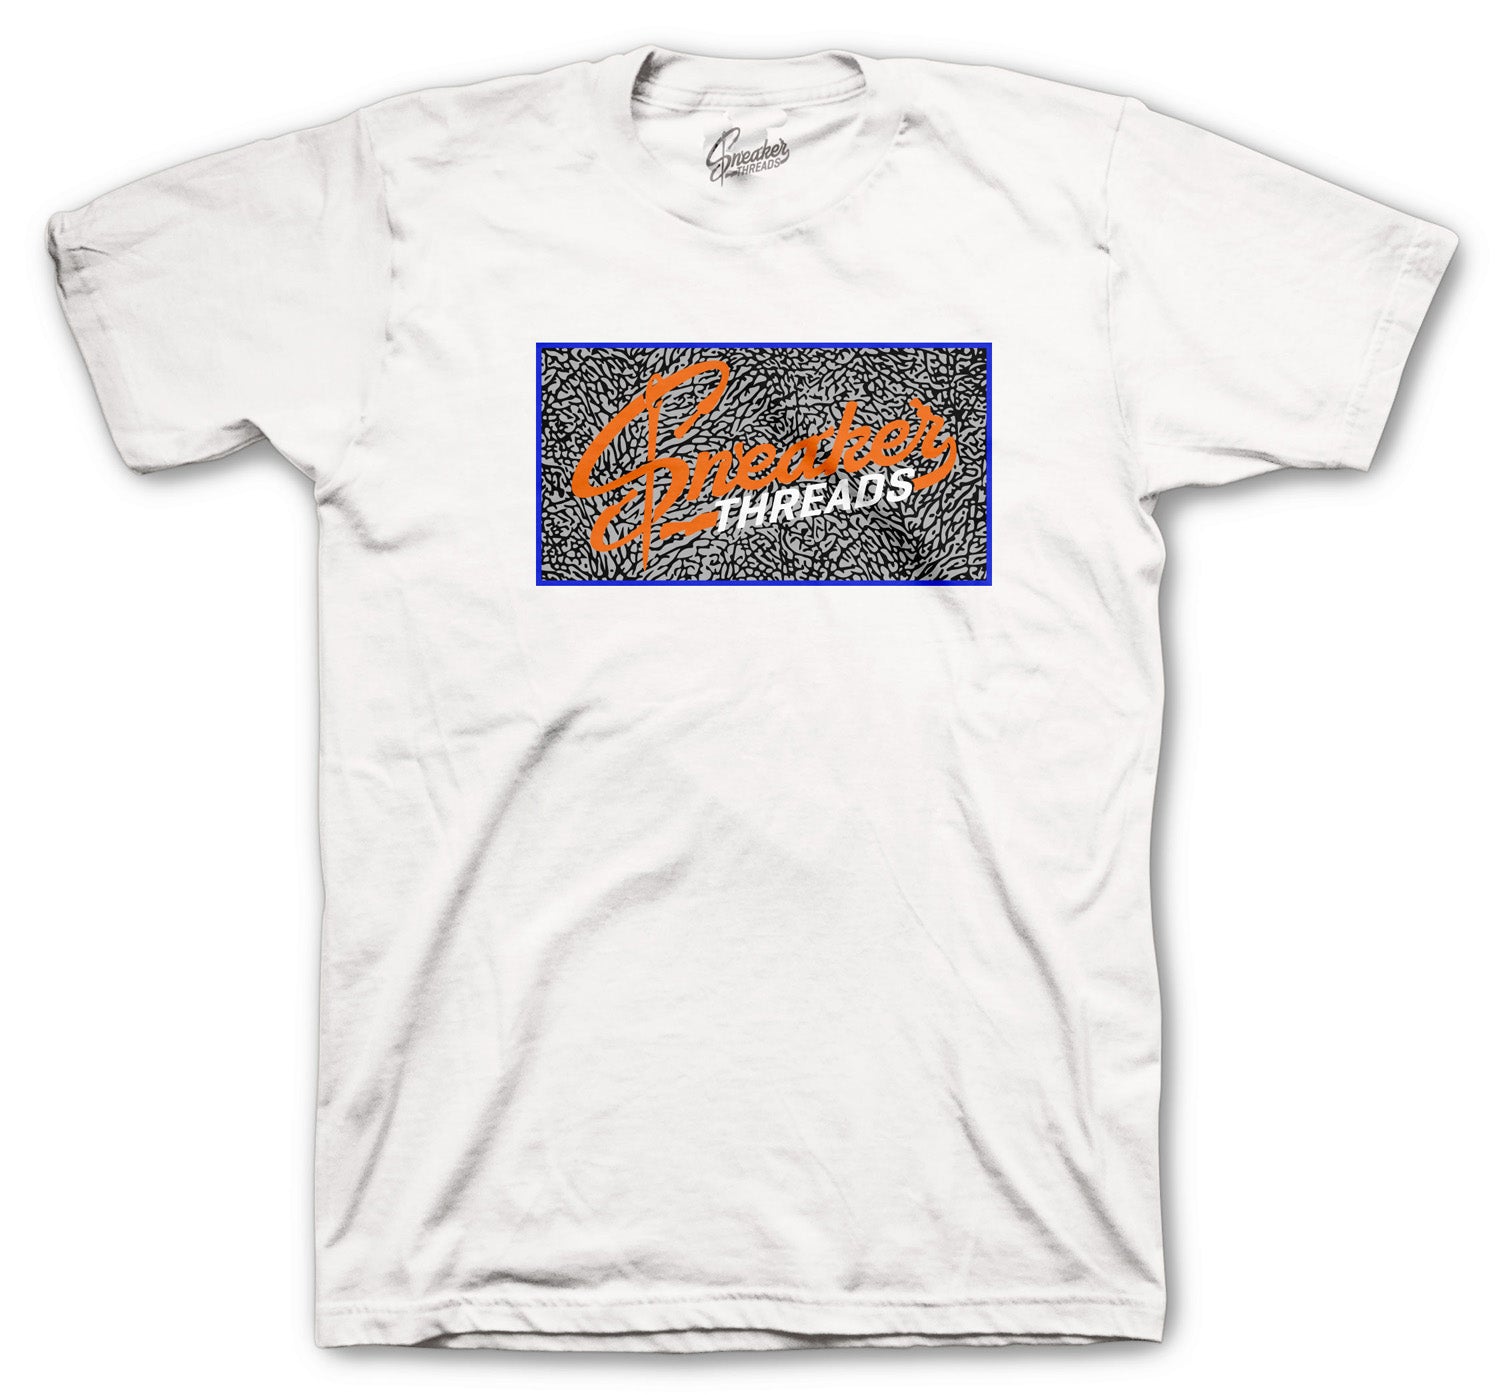 Shirts created to match the Jordan 3 knicks collection perfectly